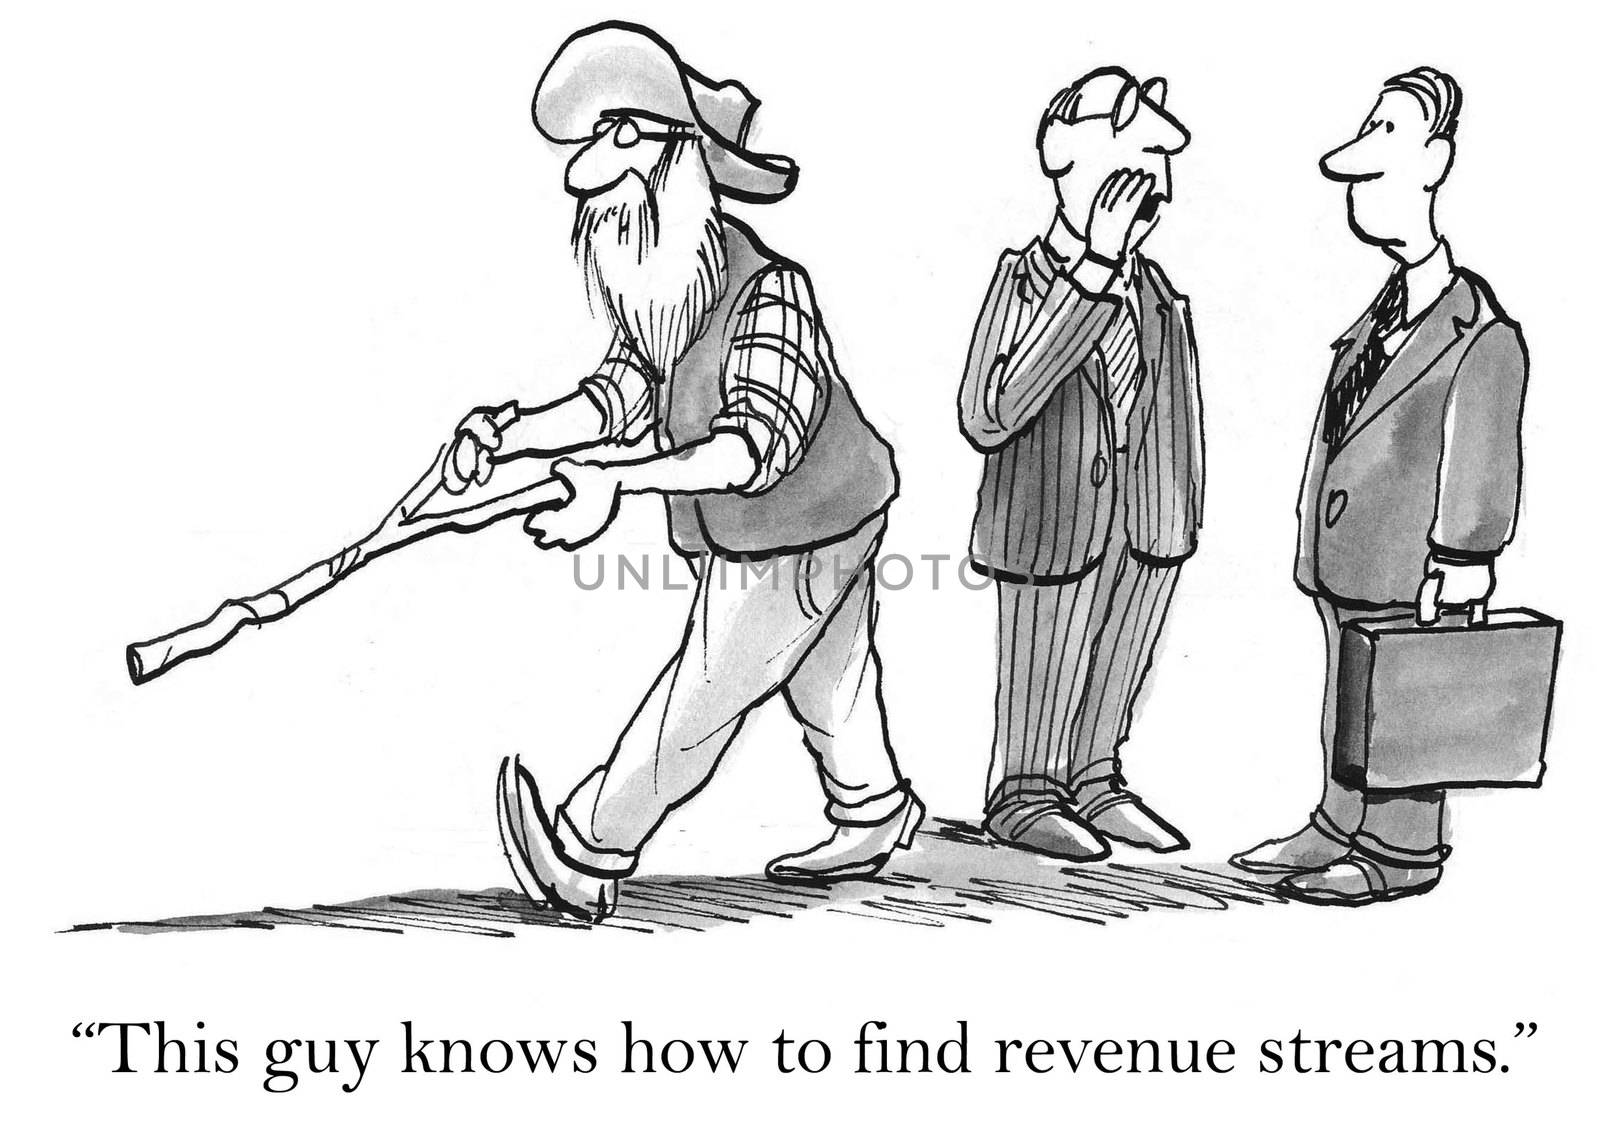 "This guy knows how to find revenue streams."